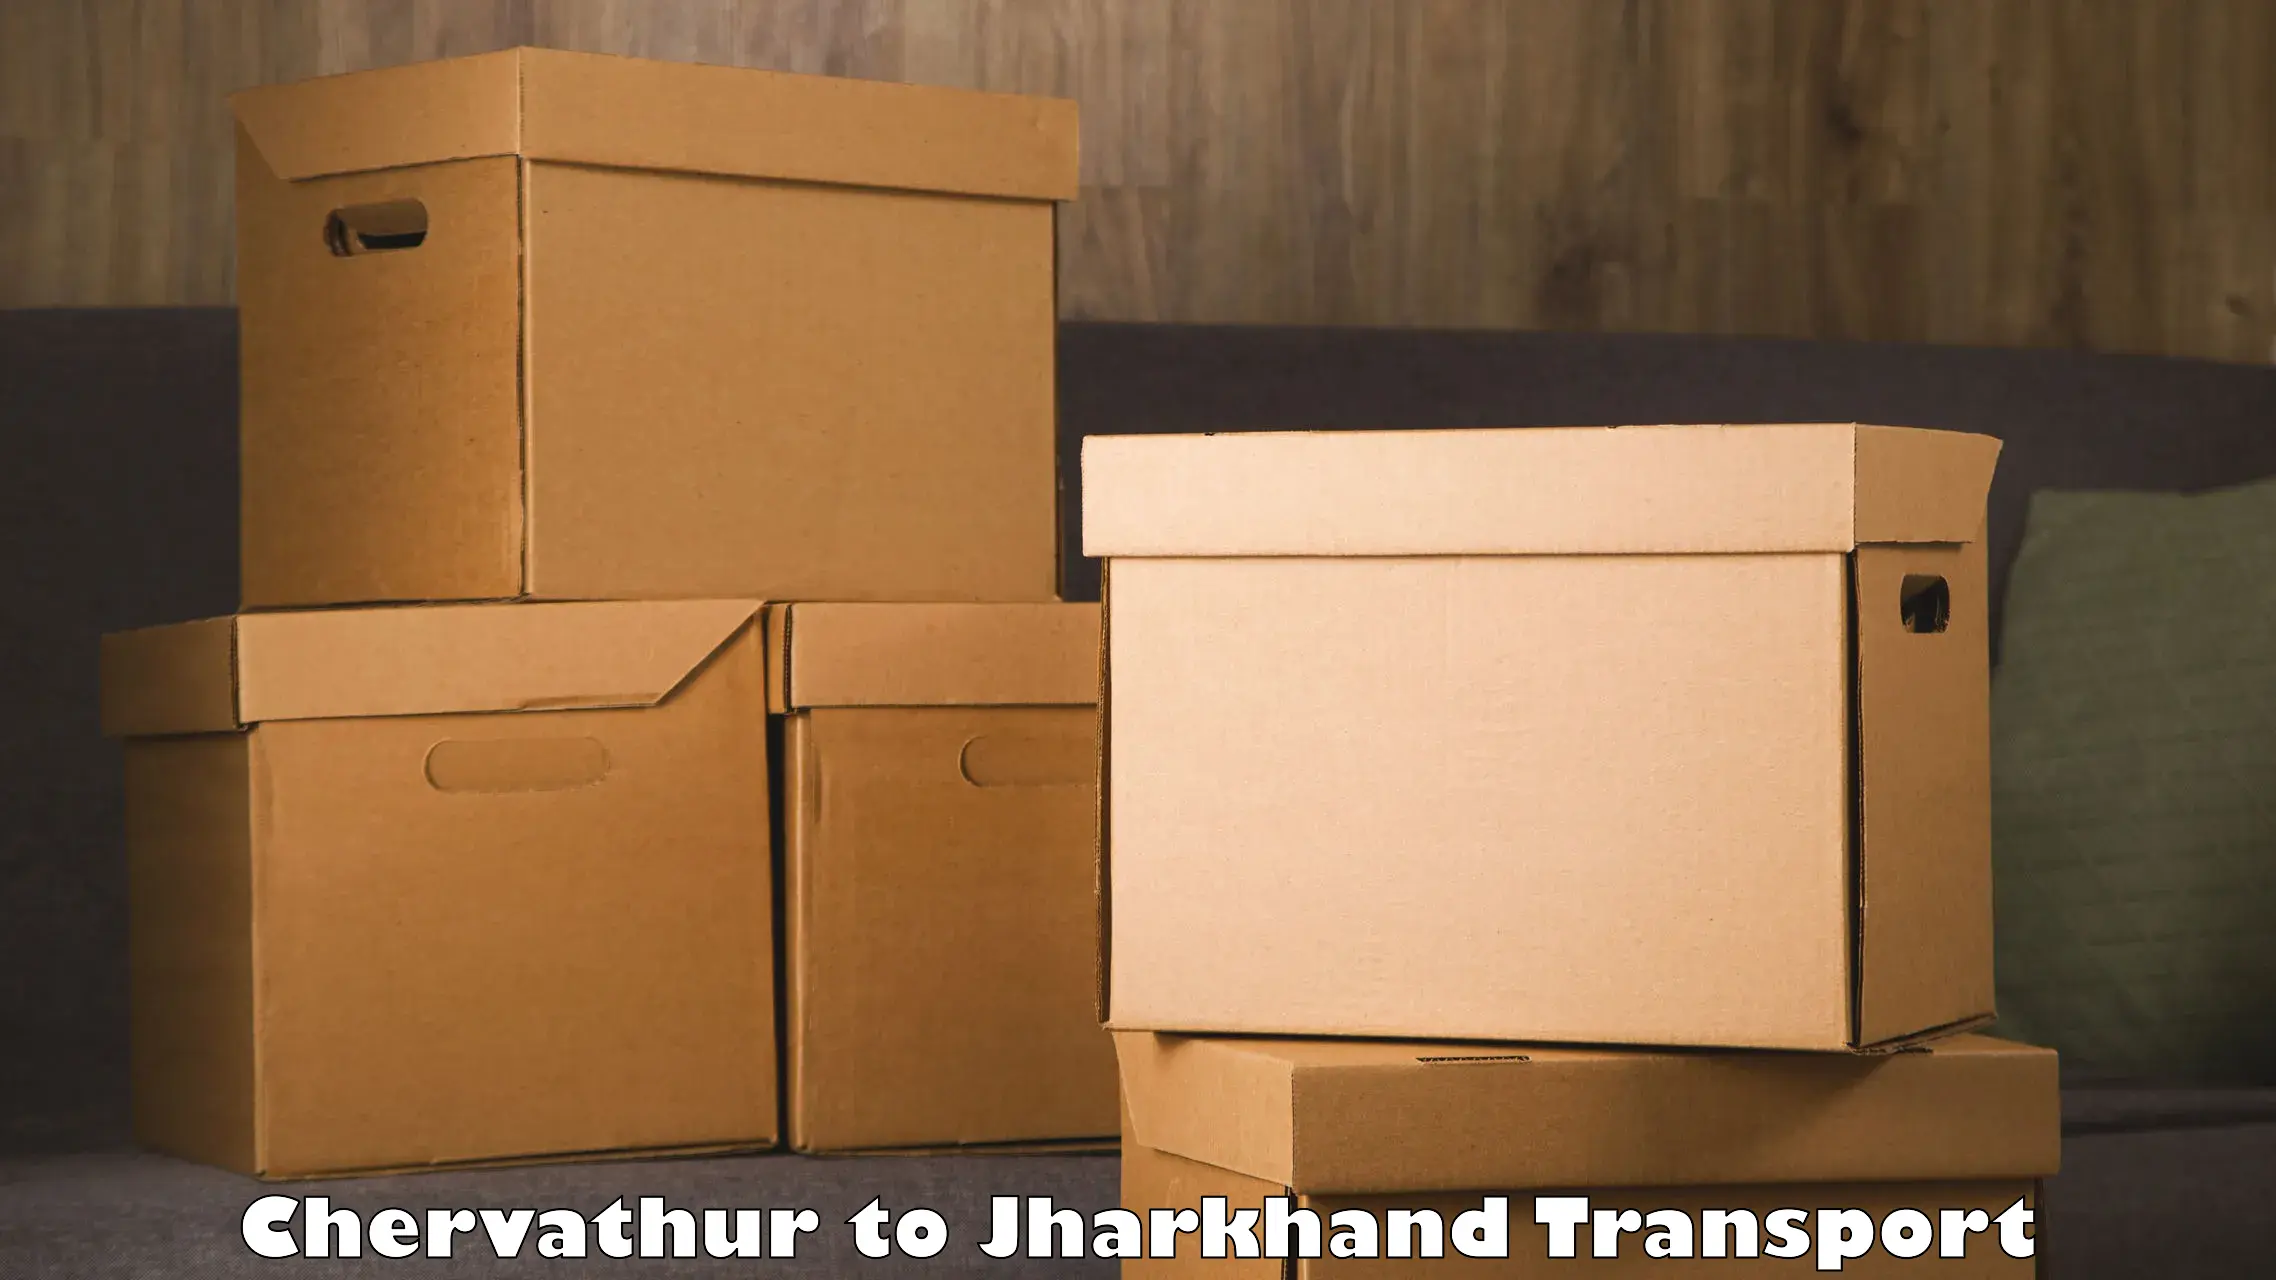 Air cargo transport services Chervathur to Jharkhand